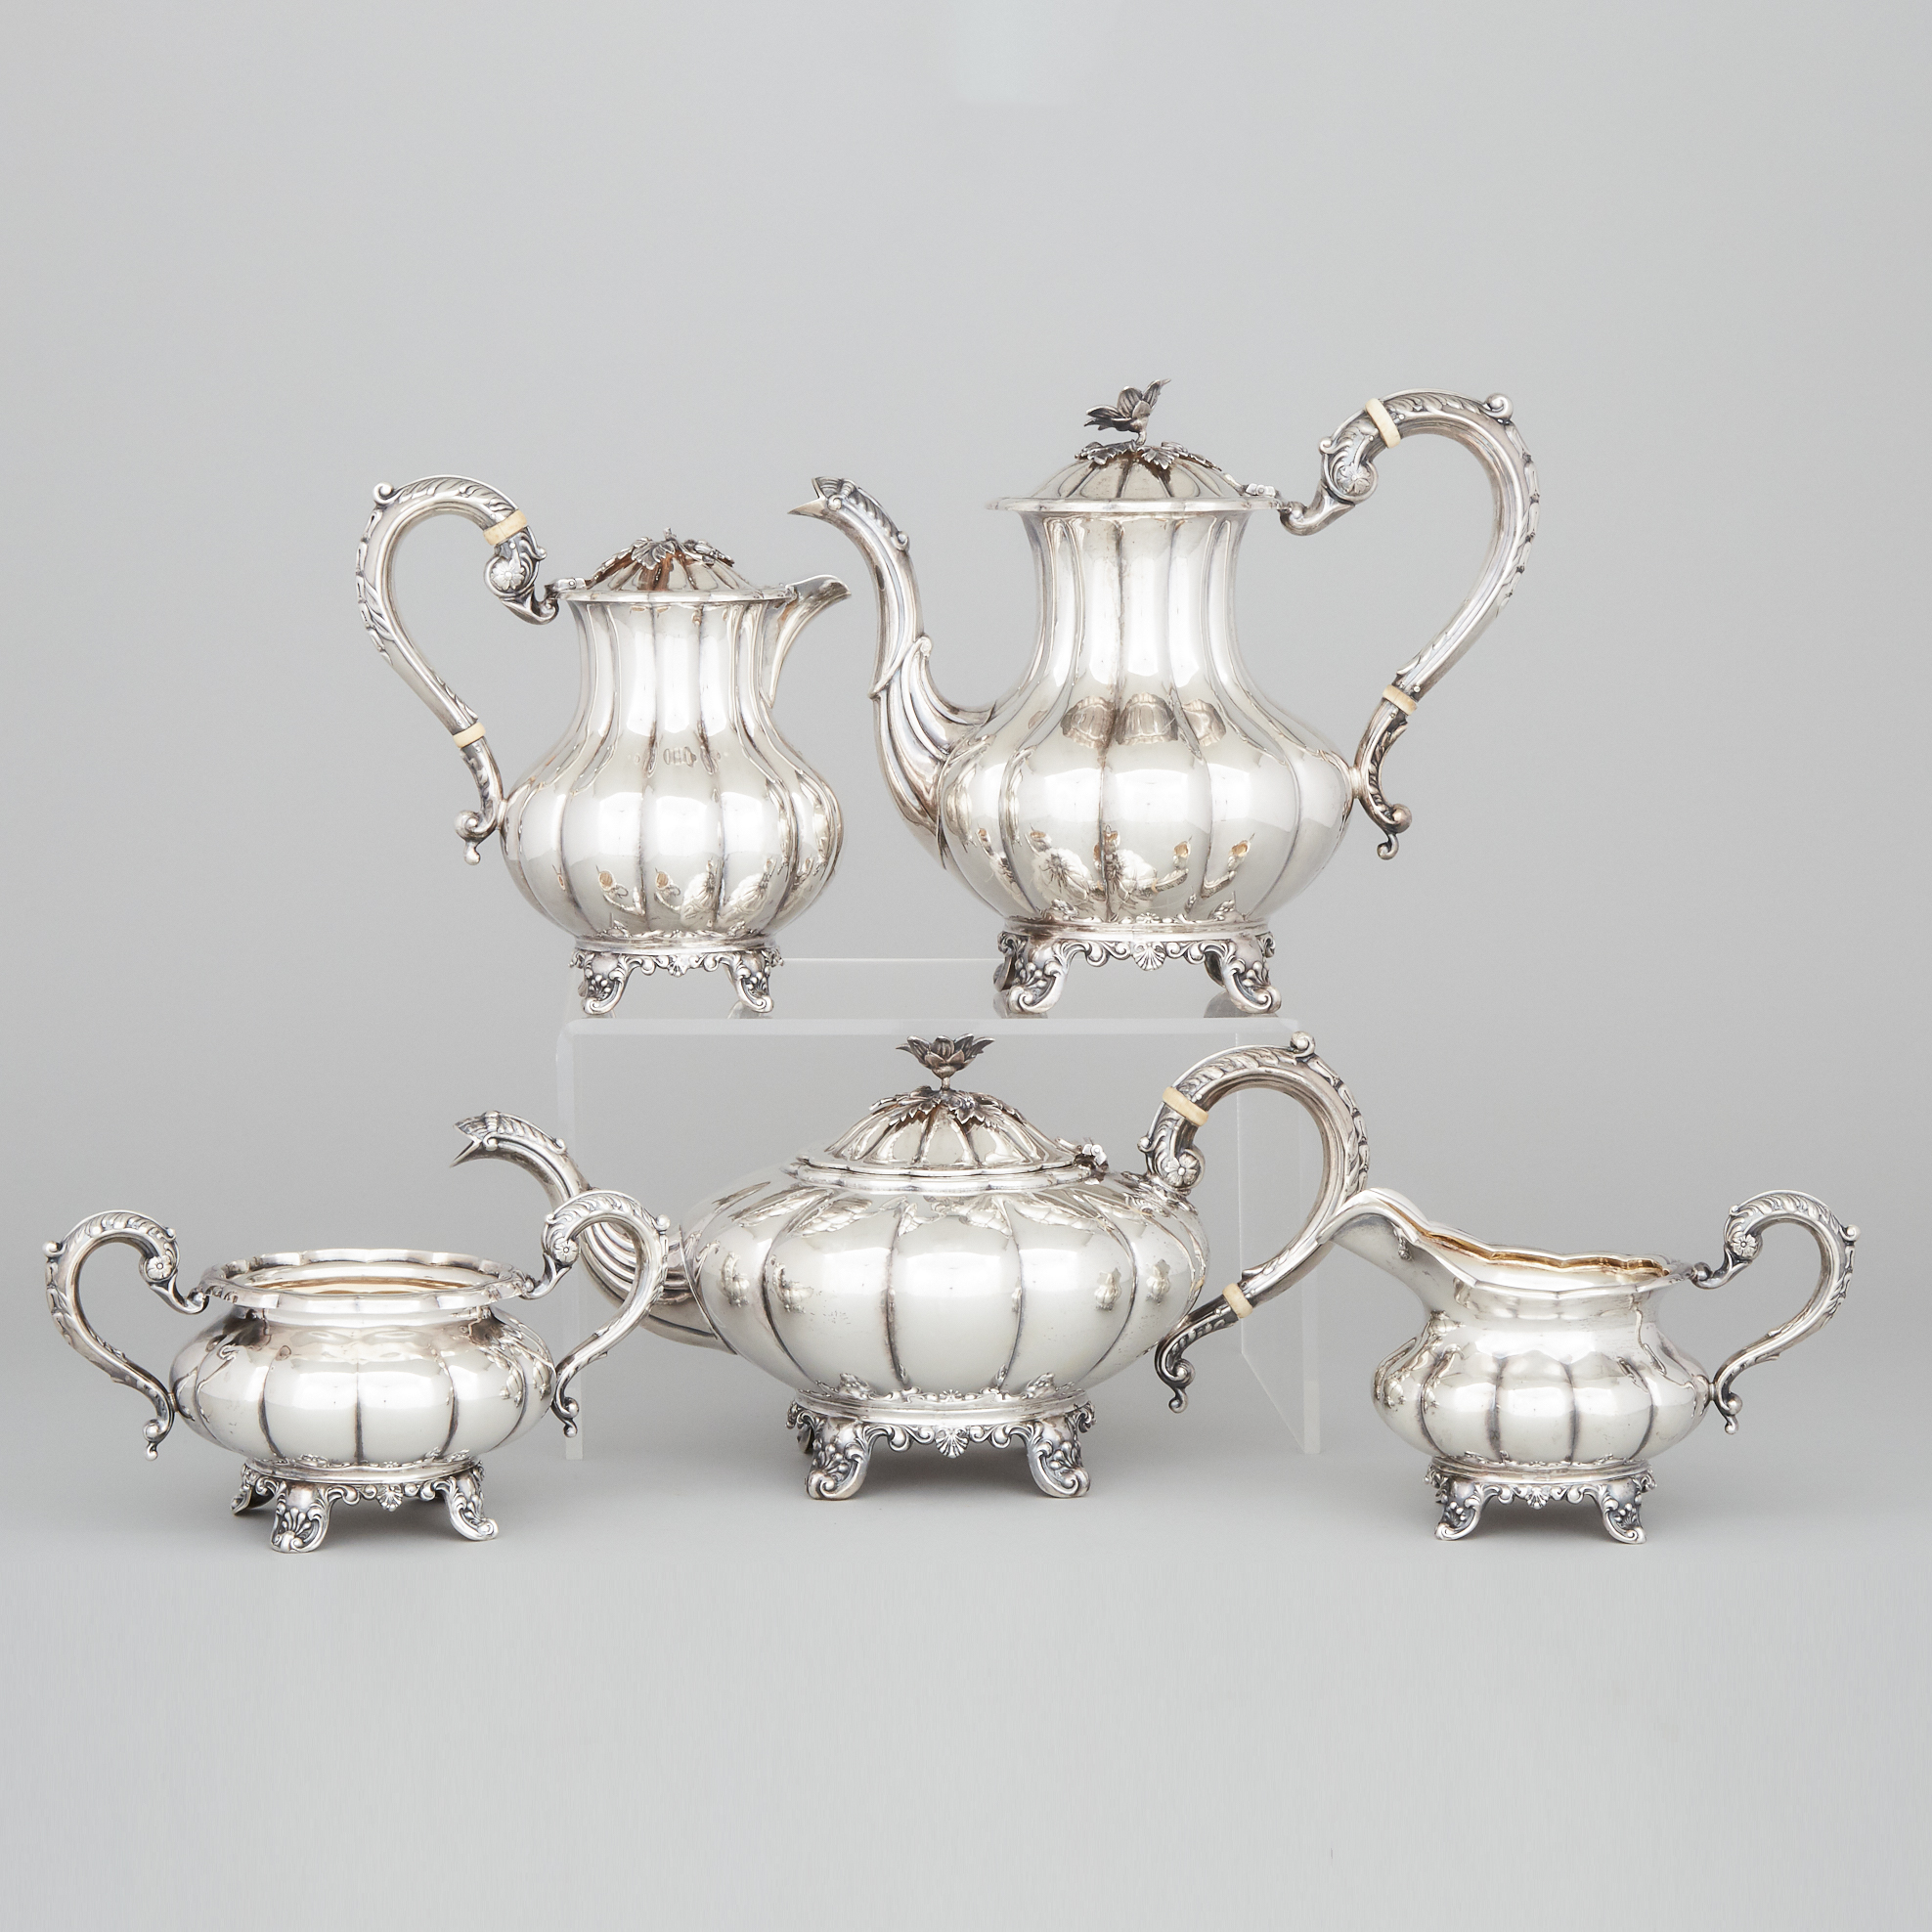 Canadian Silver Tea and Coffee Service, Henry Birks & Sons, Montreal Que., 1949-55